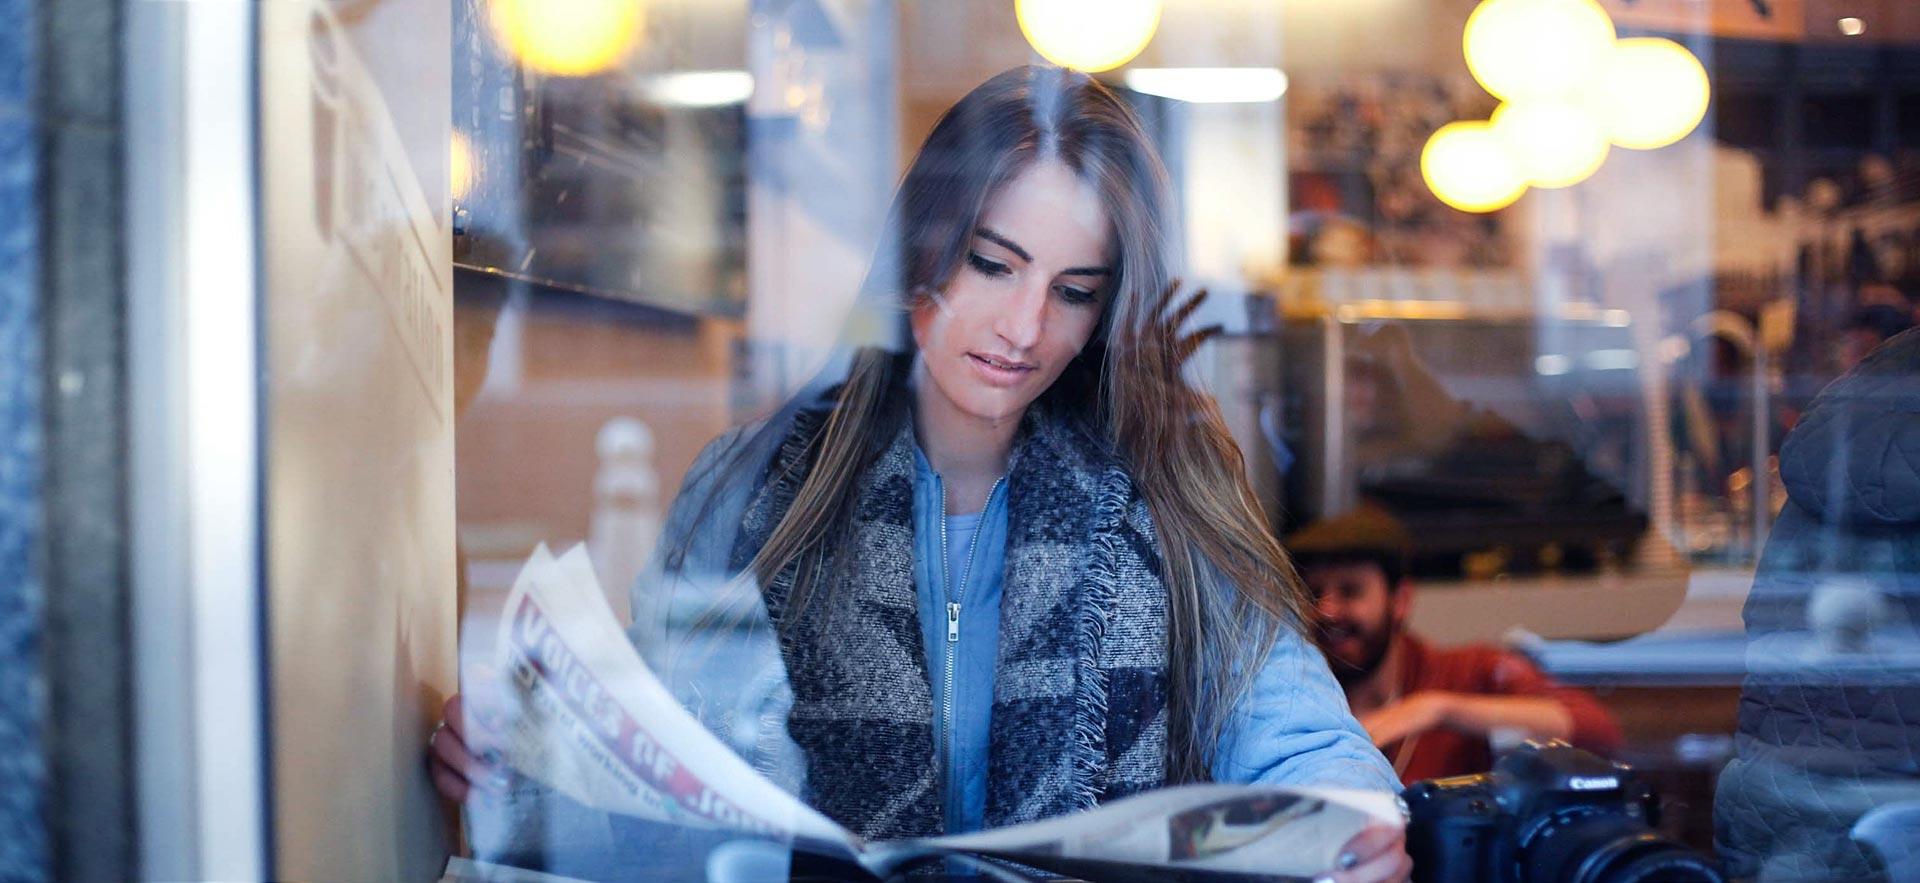 Young woman reding a newspaper in a cafe.